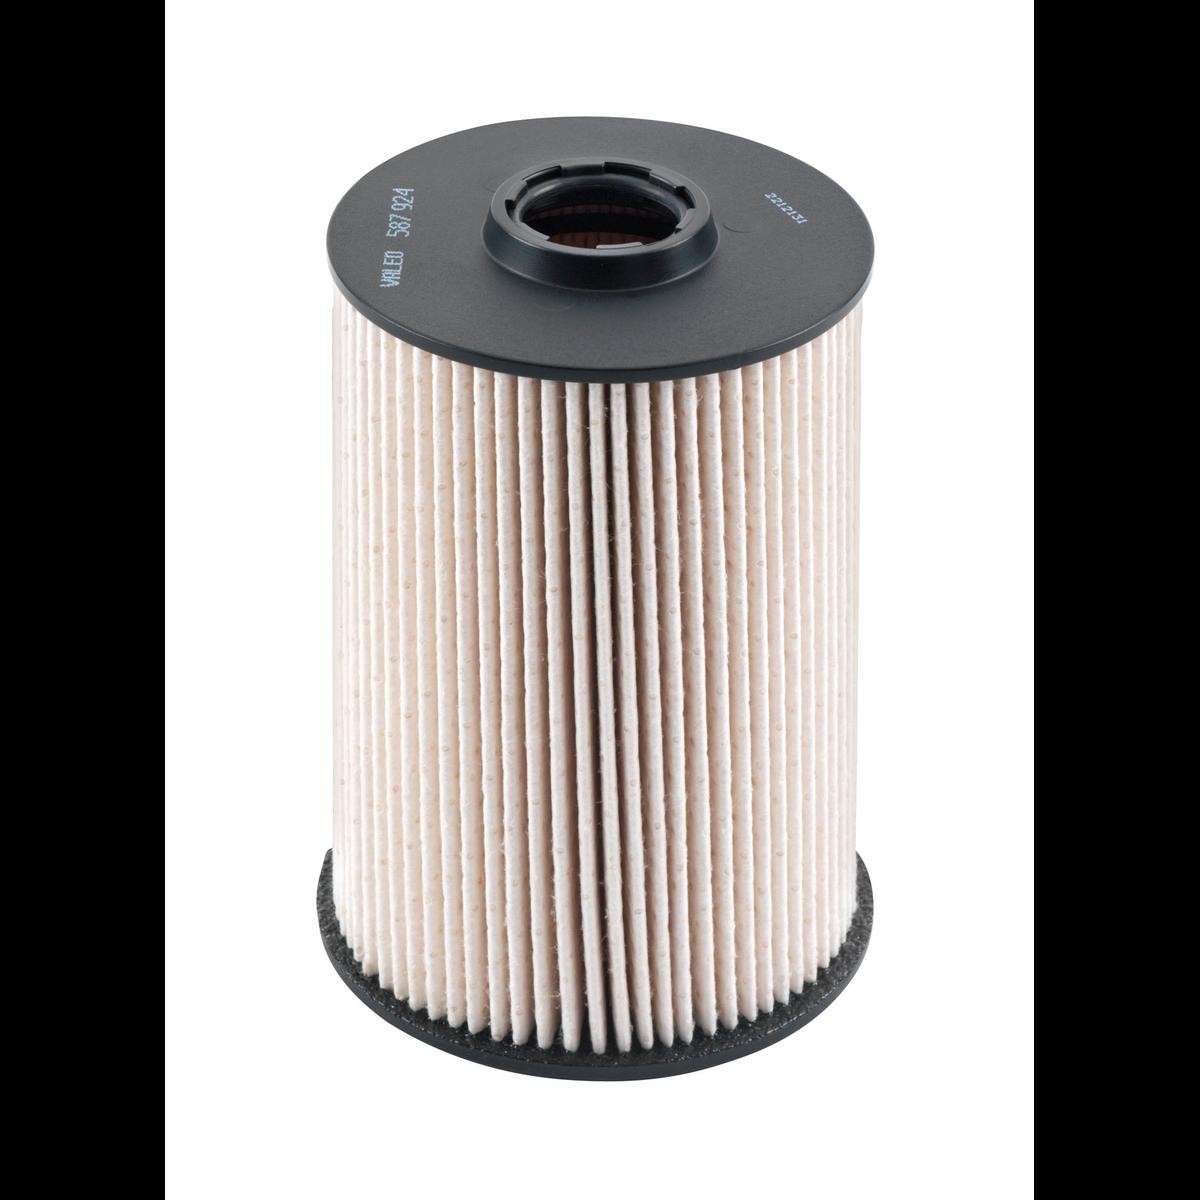 PU 937 x MANN-FILTER Fuel filter with seal ▷ AUTODOC price and review